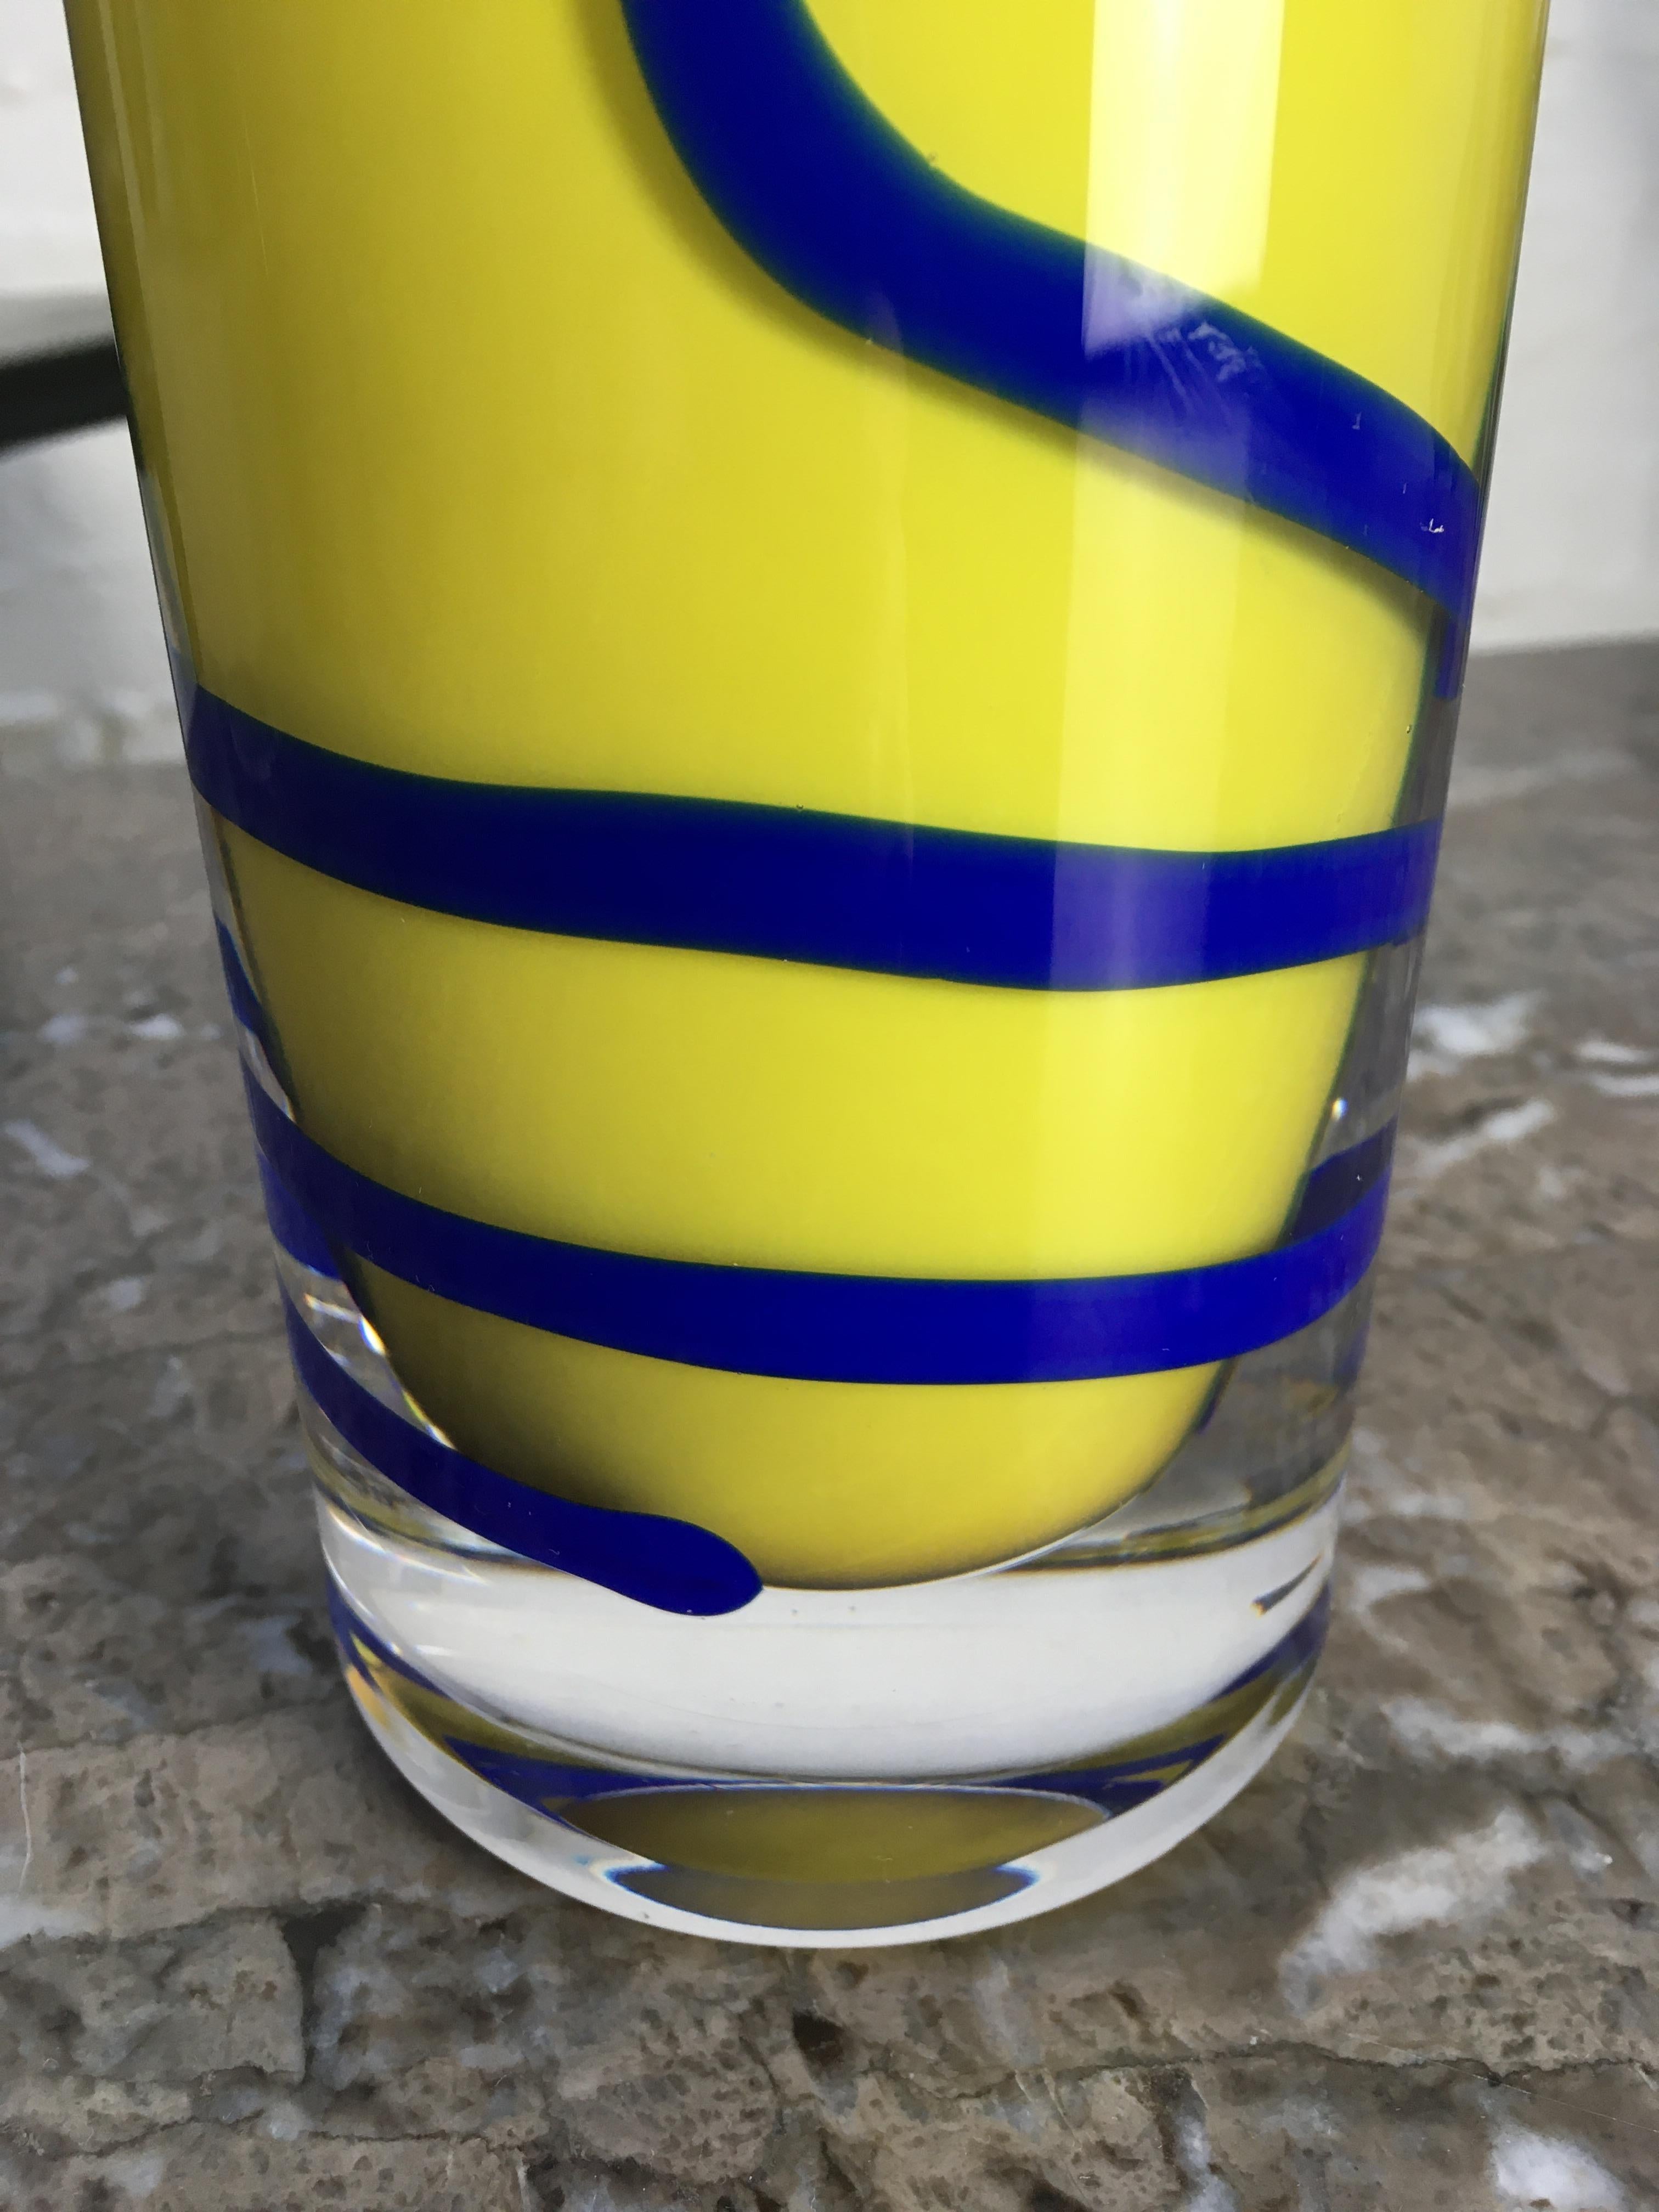 Swedish Olle Alberius Orrefors Exhibition Vase Signed Numbered 1973 Acid Yellow Cobalt For Sale